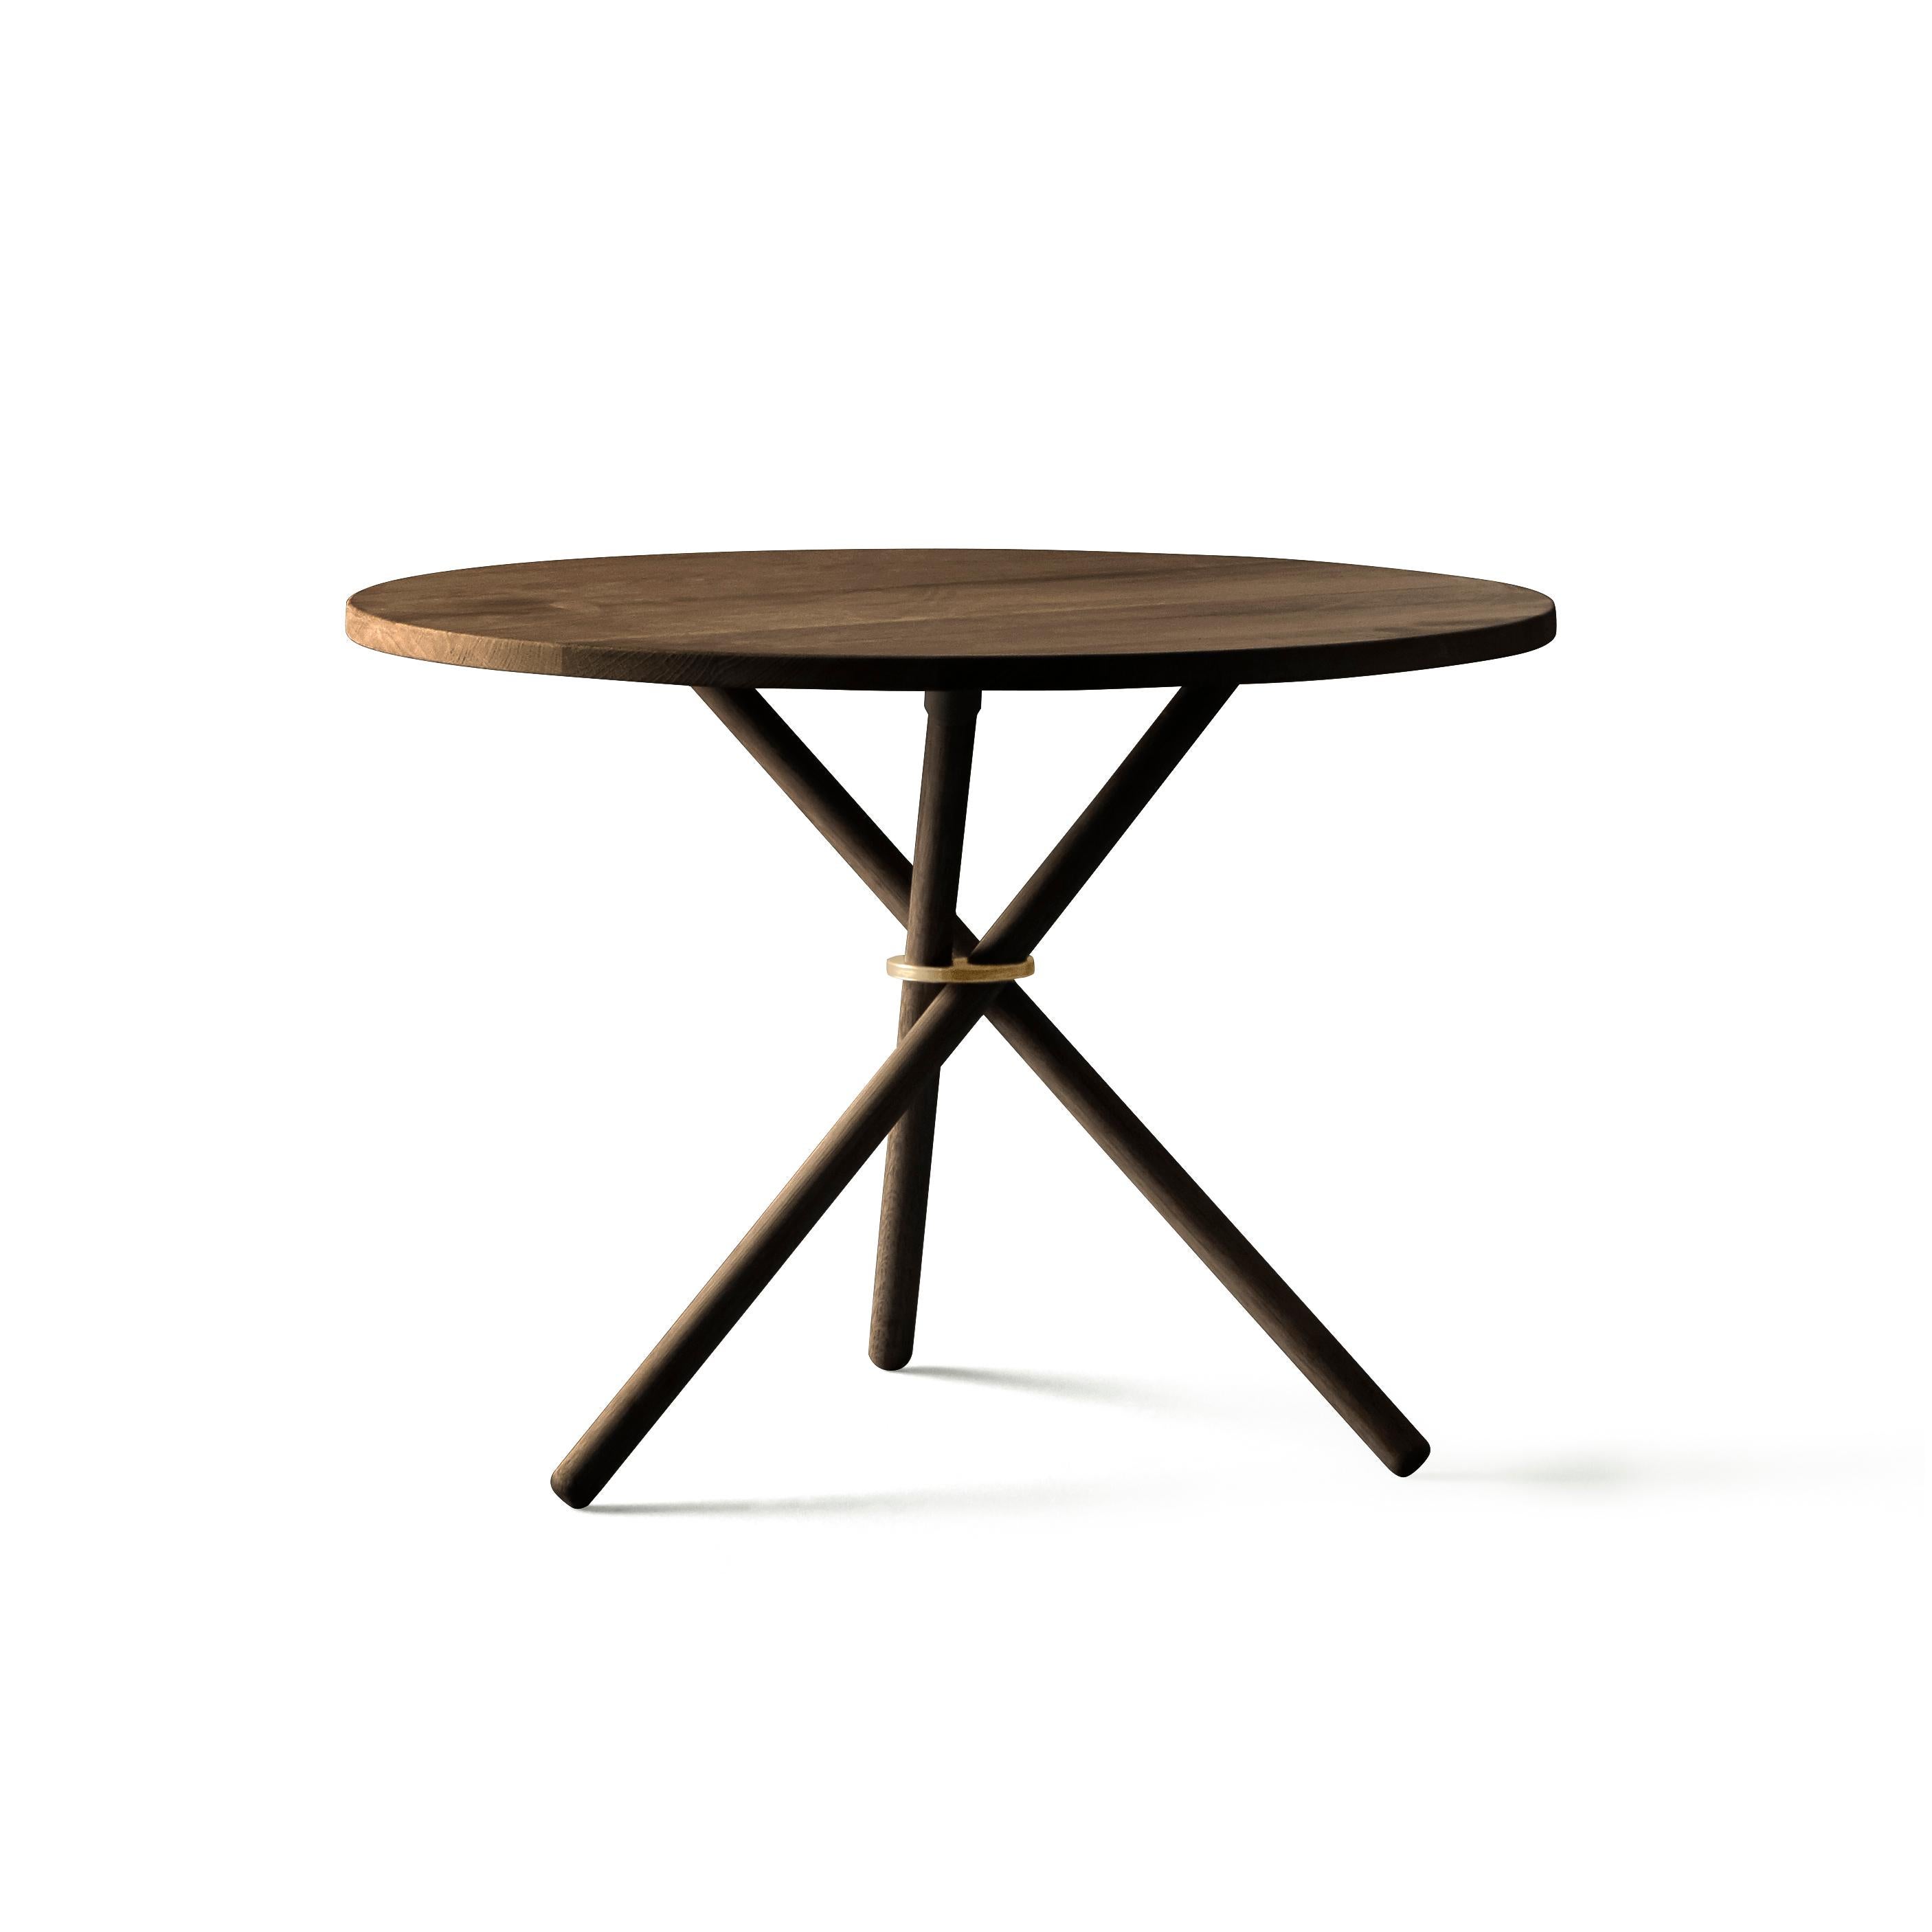 Daphne is a simple and stylish coffee or side table. The table is constructed by three sub elements: The assembly ring, wooden legs and table top in either concrete, oak or birch. The almost floating table top and the sculptural impression of the